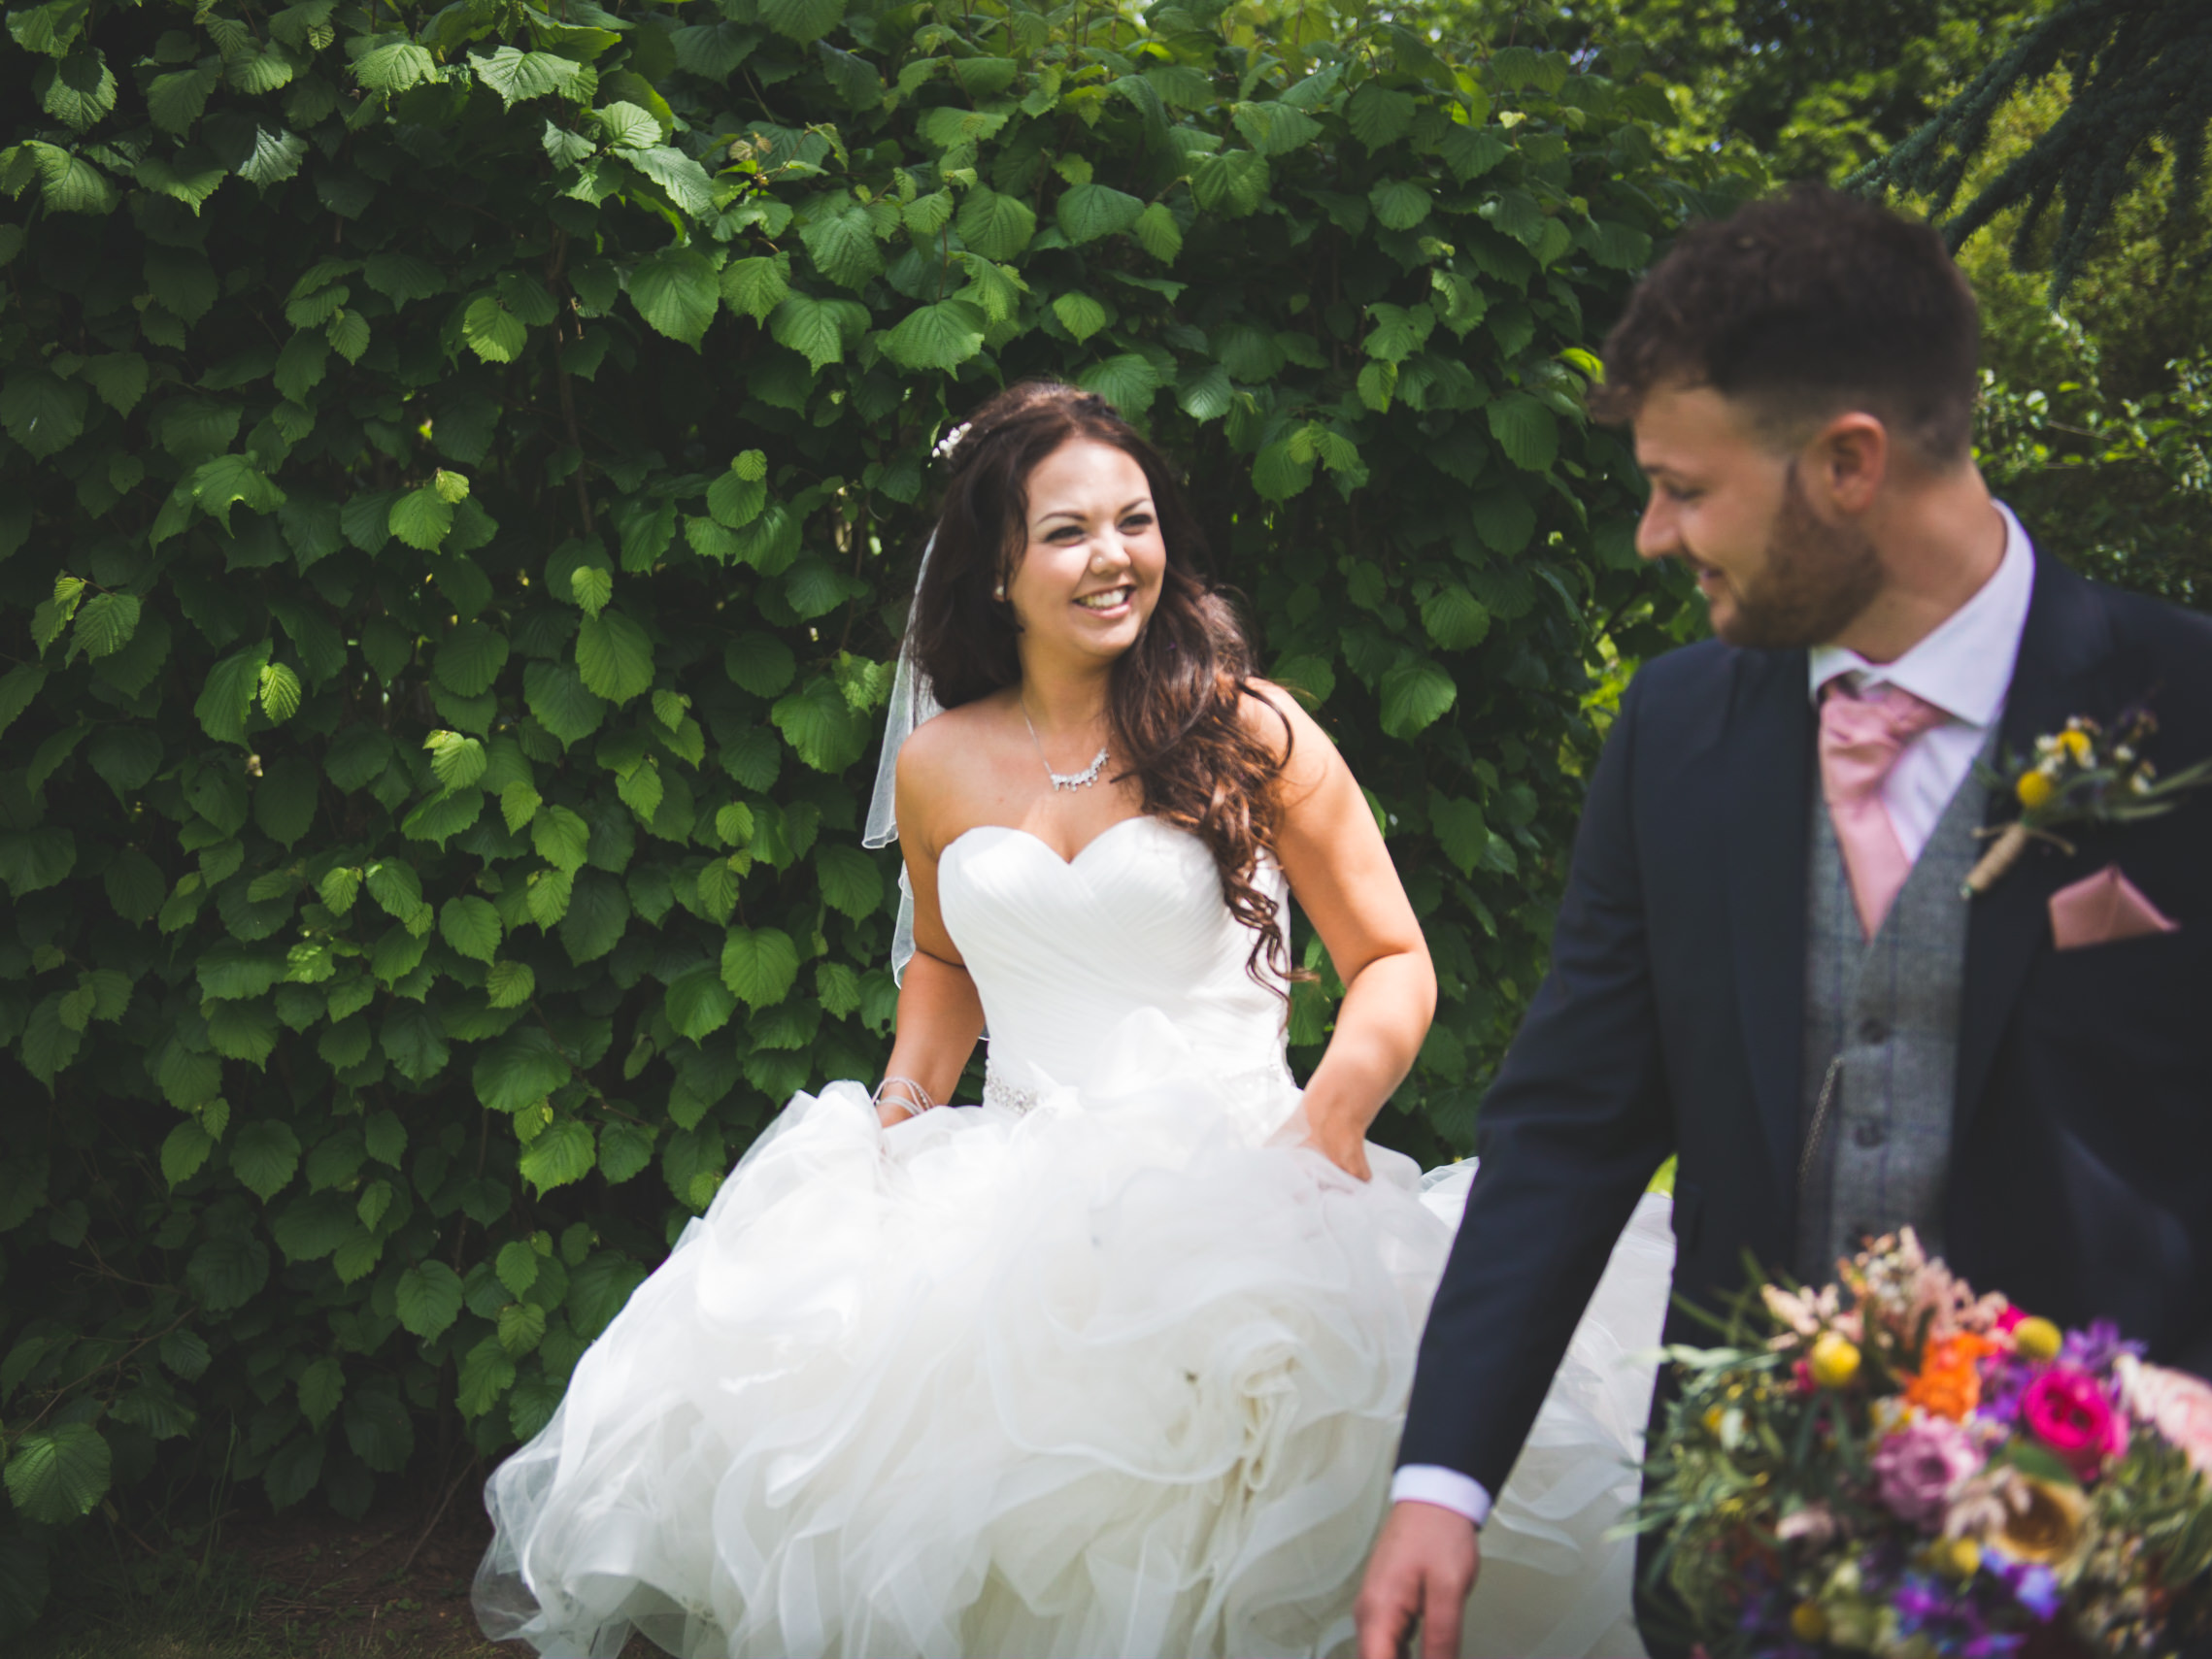 The bride looking stunning in her gorgeous Pronovias dress